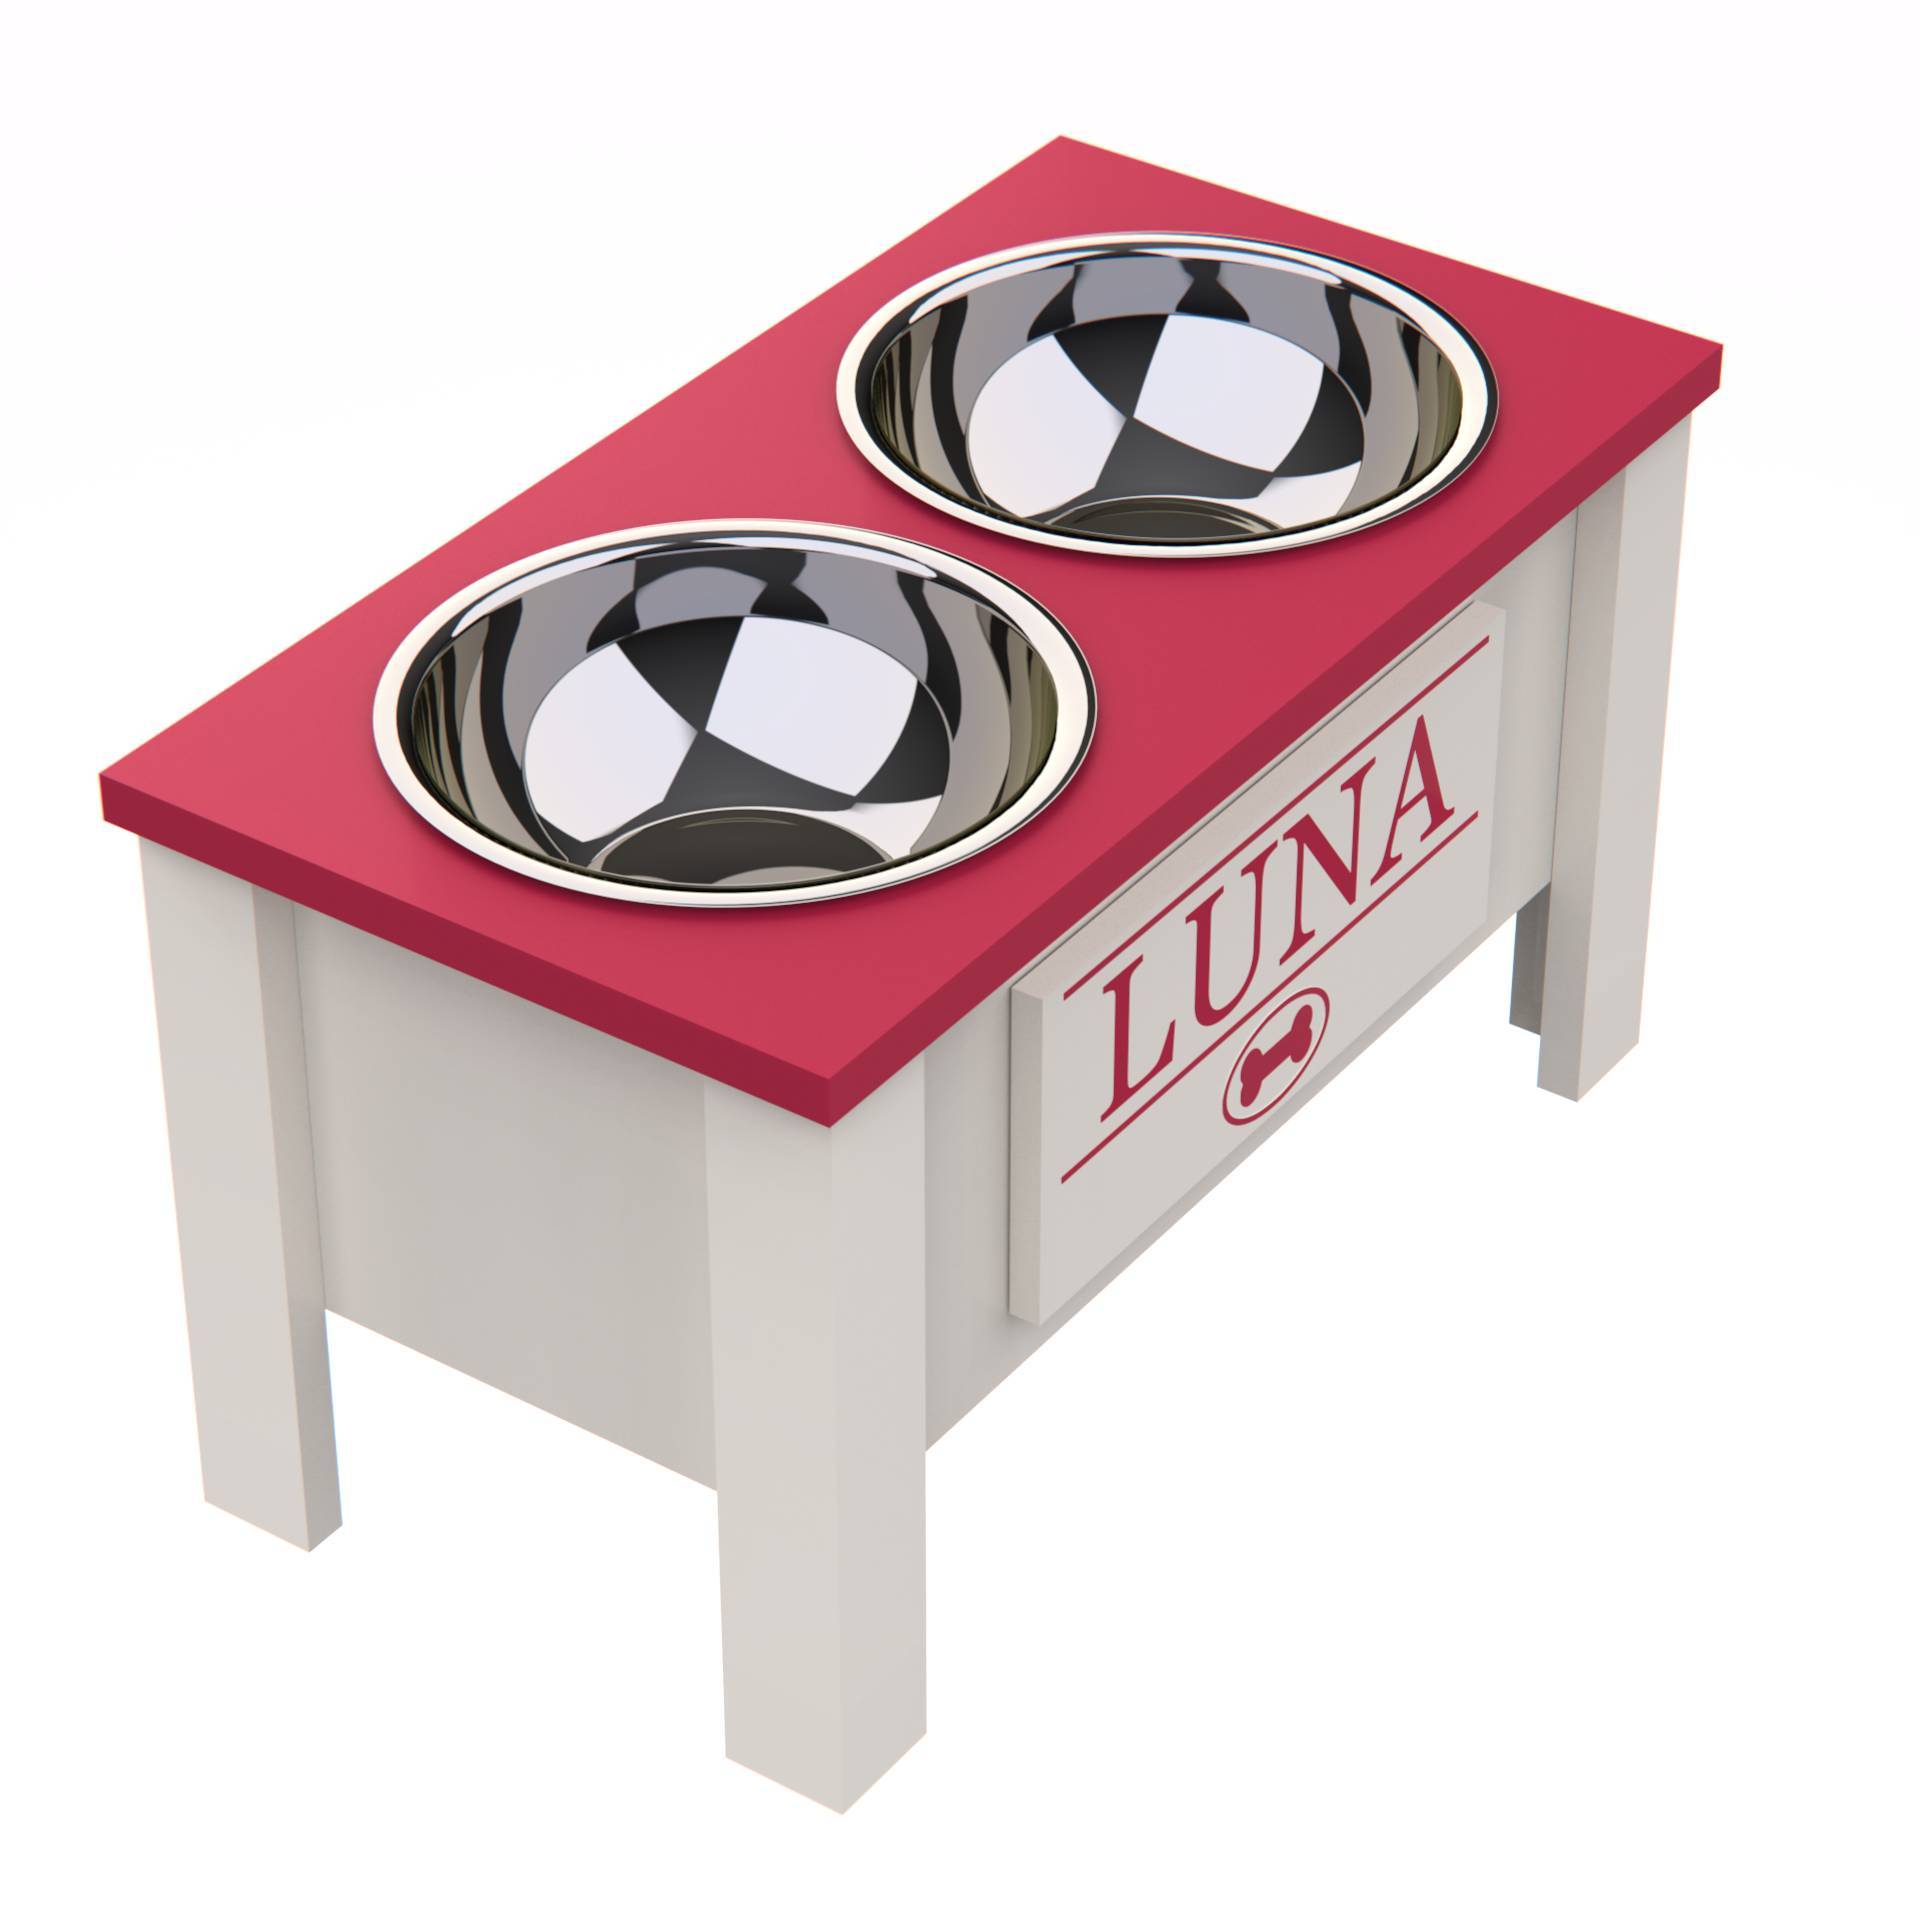 Personalized Elevated Dog Bowl in Magenta - GrooveThis Woodshop - GT002MAG-L